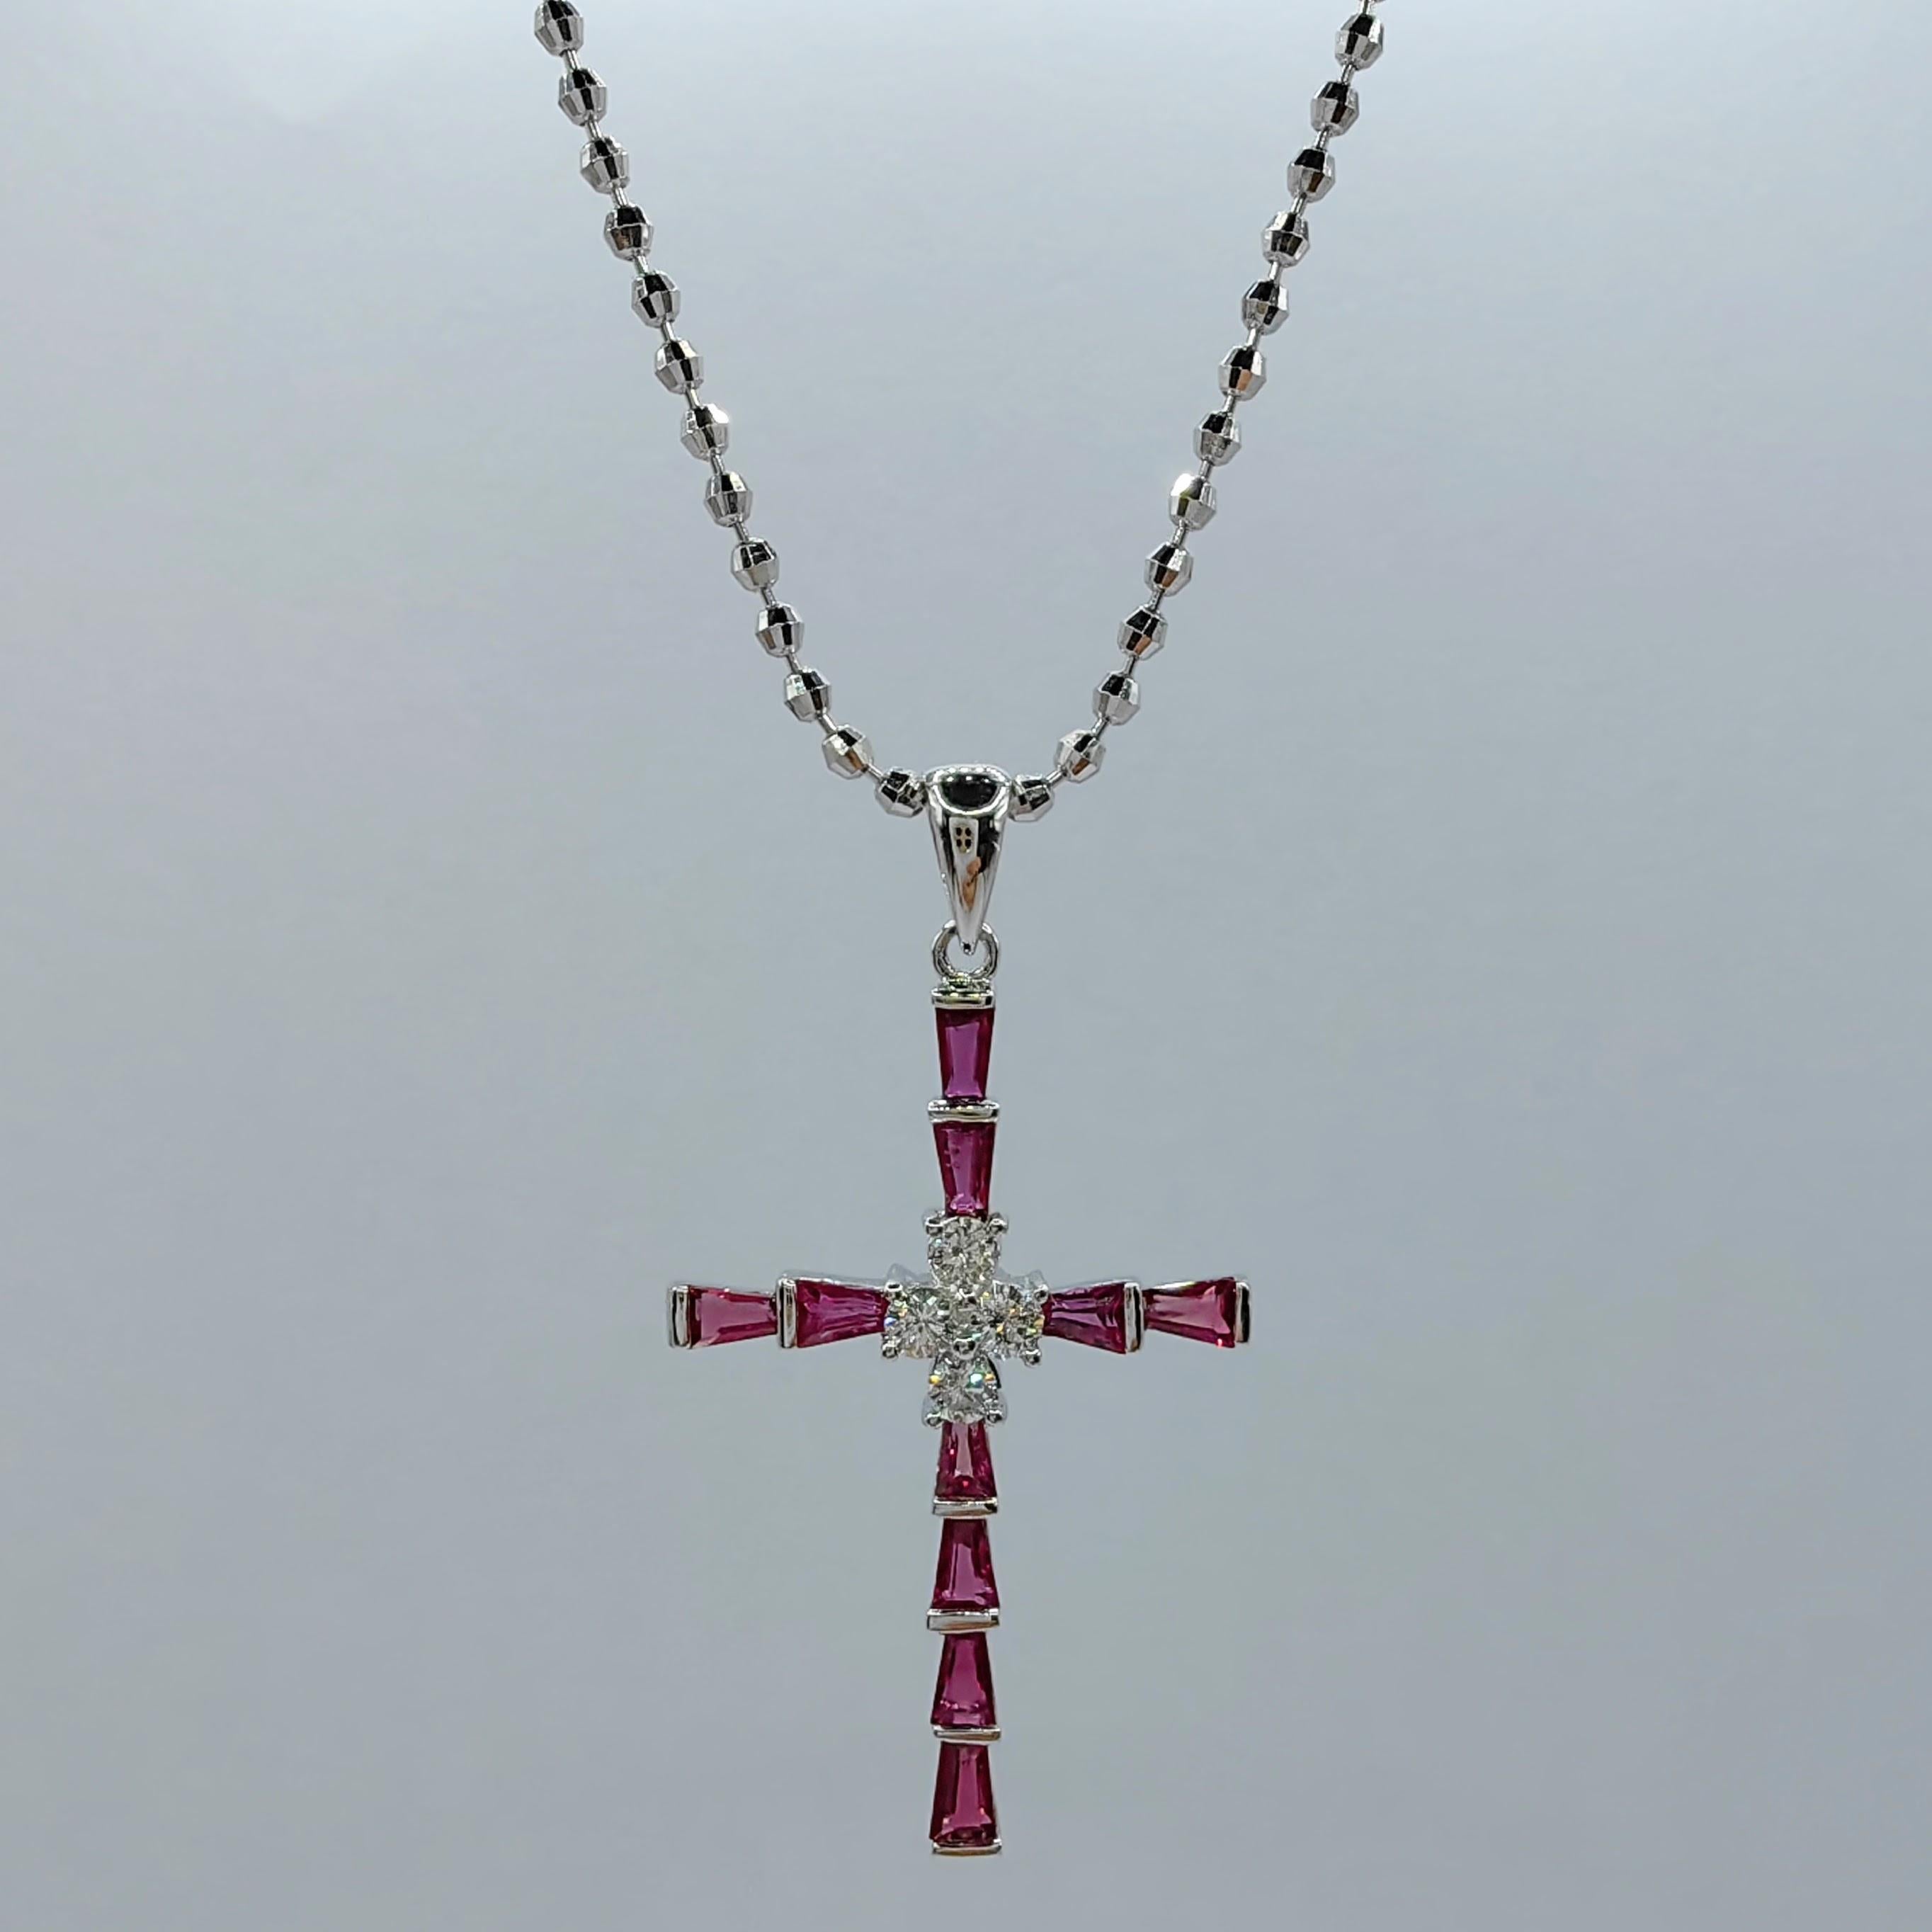 1.26ct Pigeon Blood Ruby & Diamond Cross Necklace Pendant in 18K White Gold 4